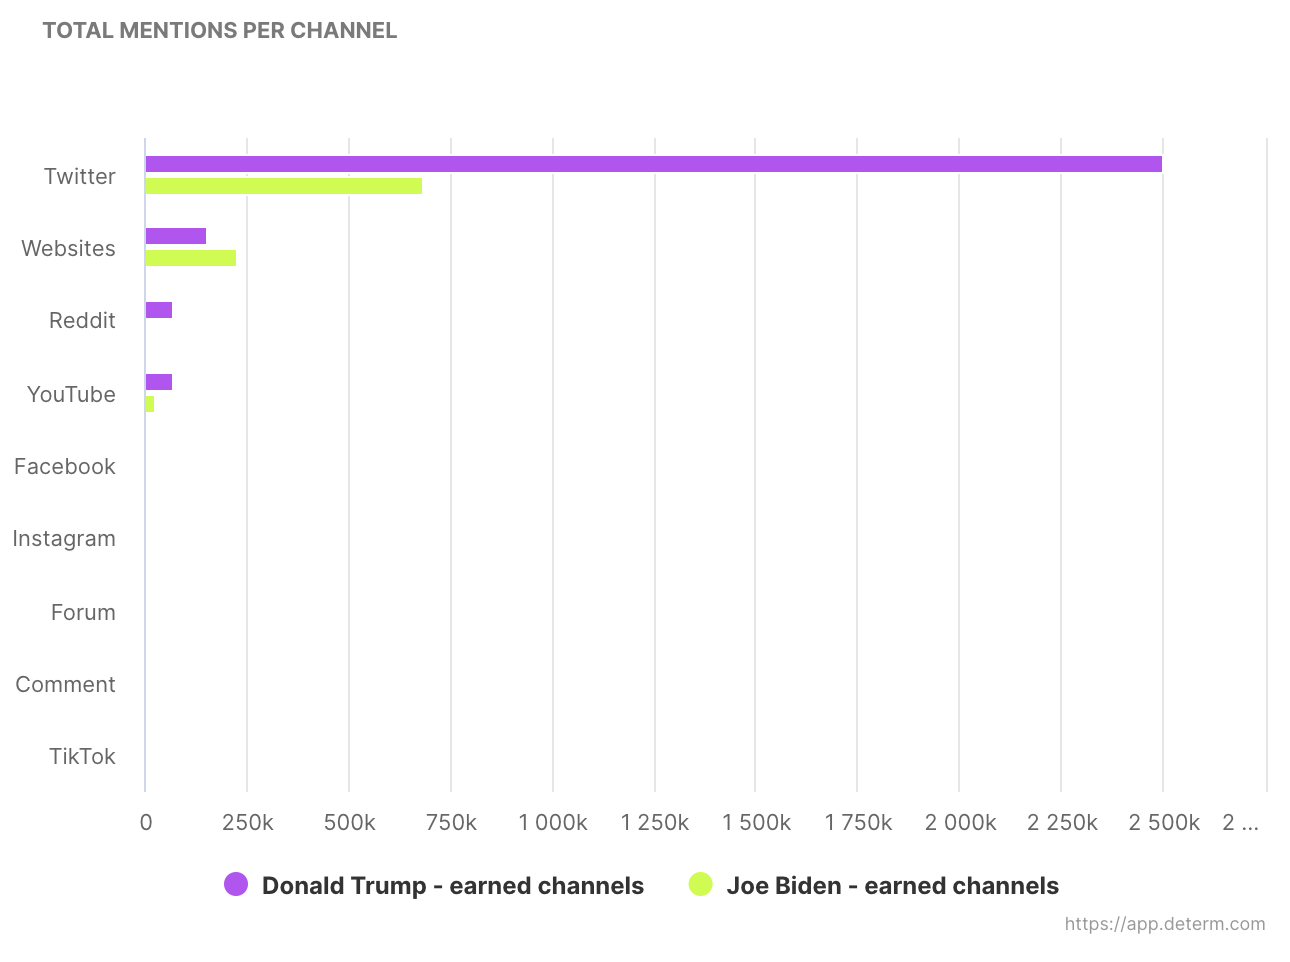 track reputation through number of mentions of Biden and Trump on channels